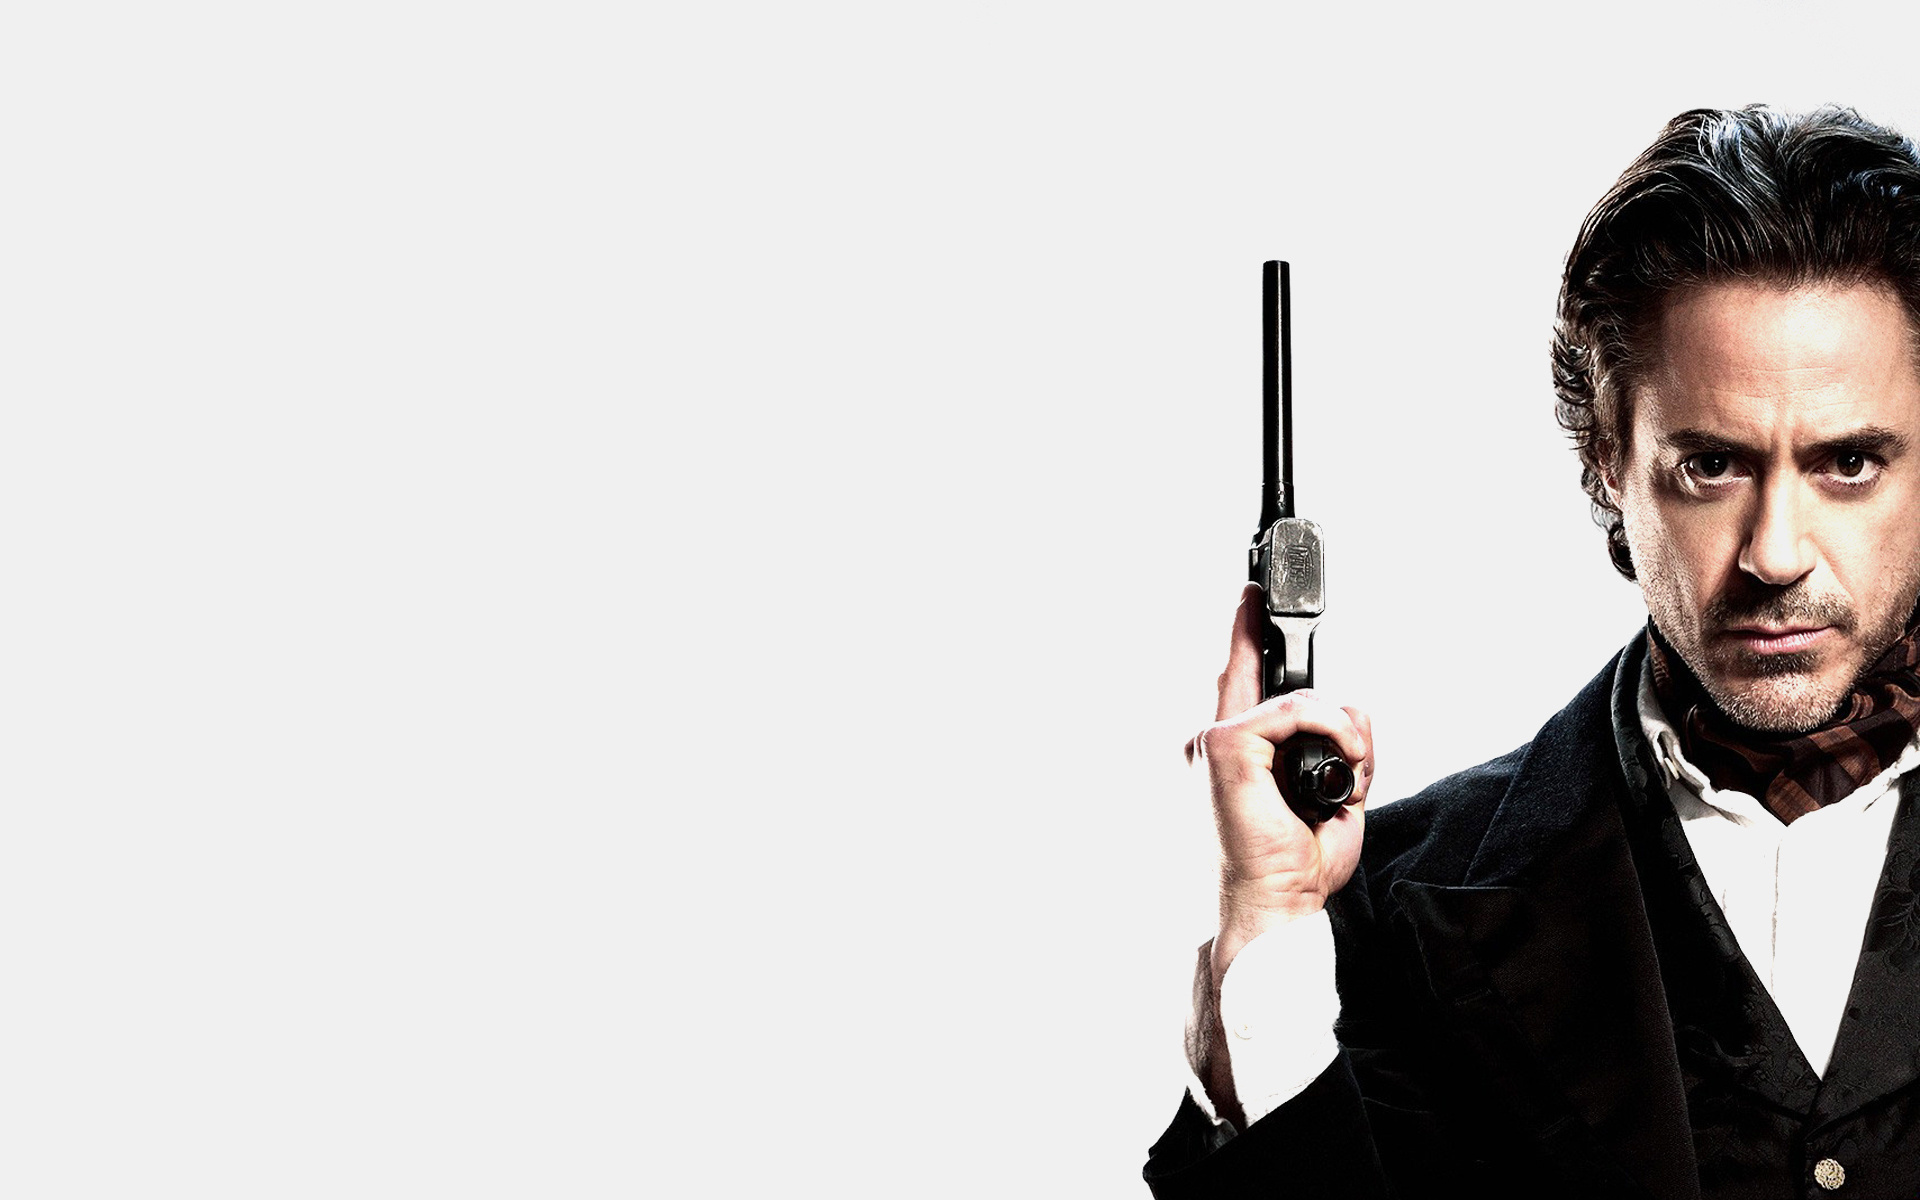 Robert Downey Jr., Dashing detective, Mysterious backdrop, Action-packed, 1920x1200 HD Desktop